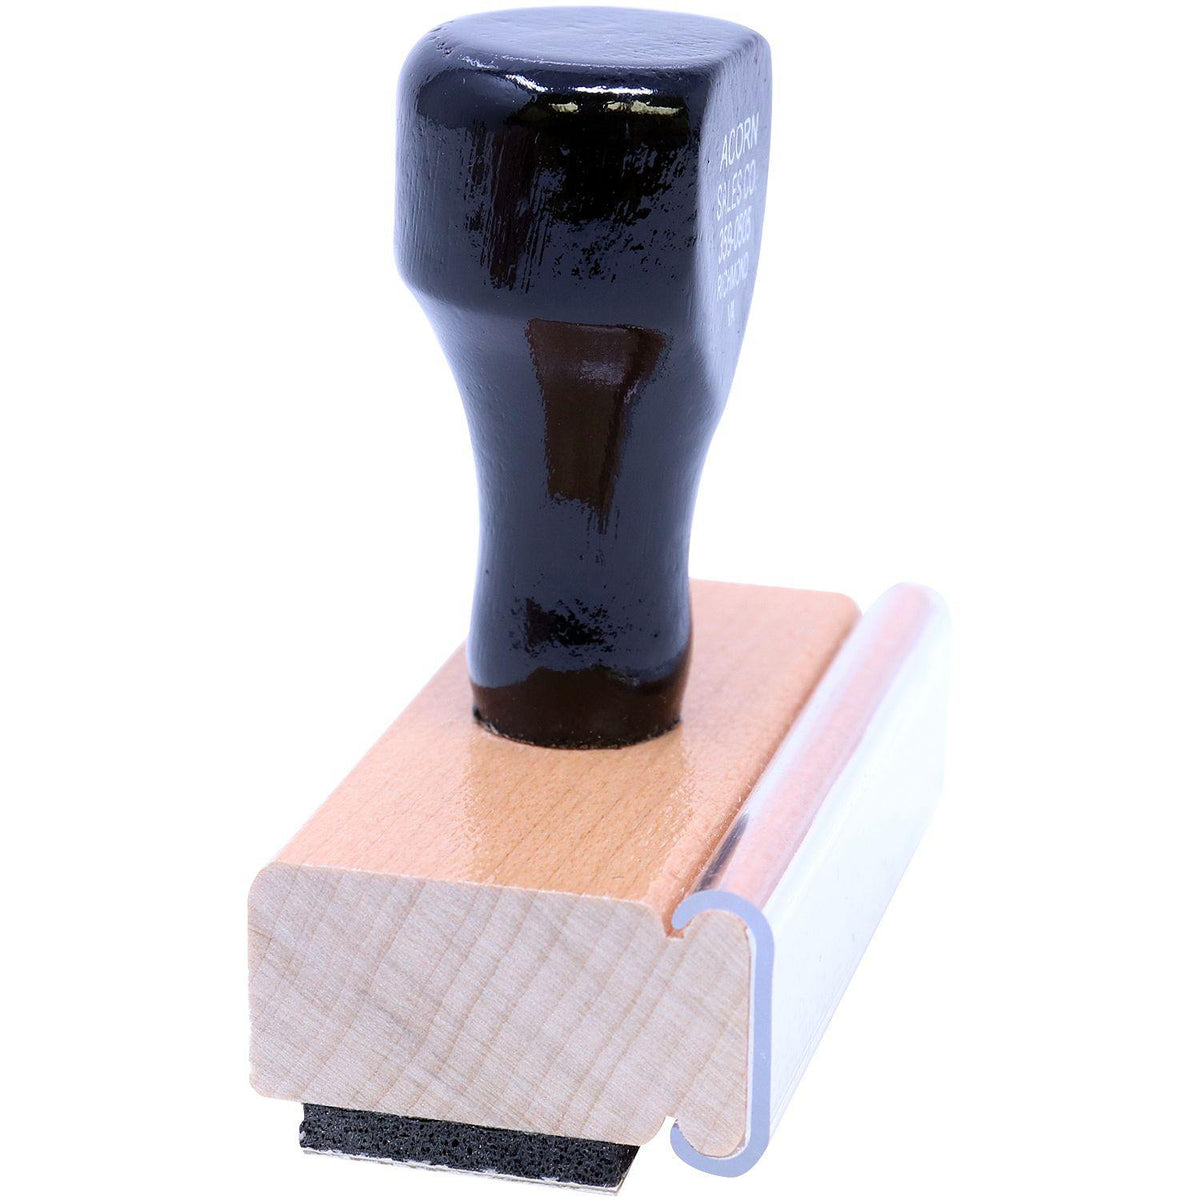 Side View of Large Evidence Rubber Stamp at an Angle